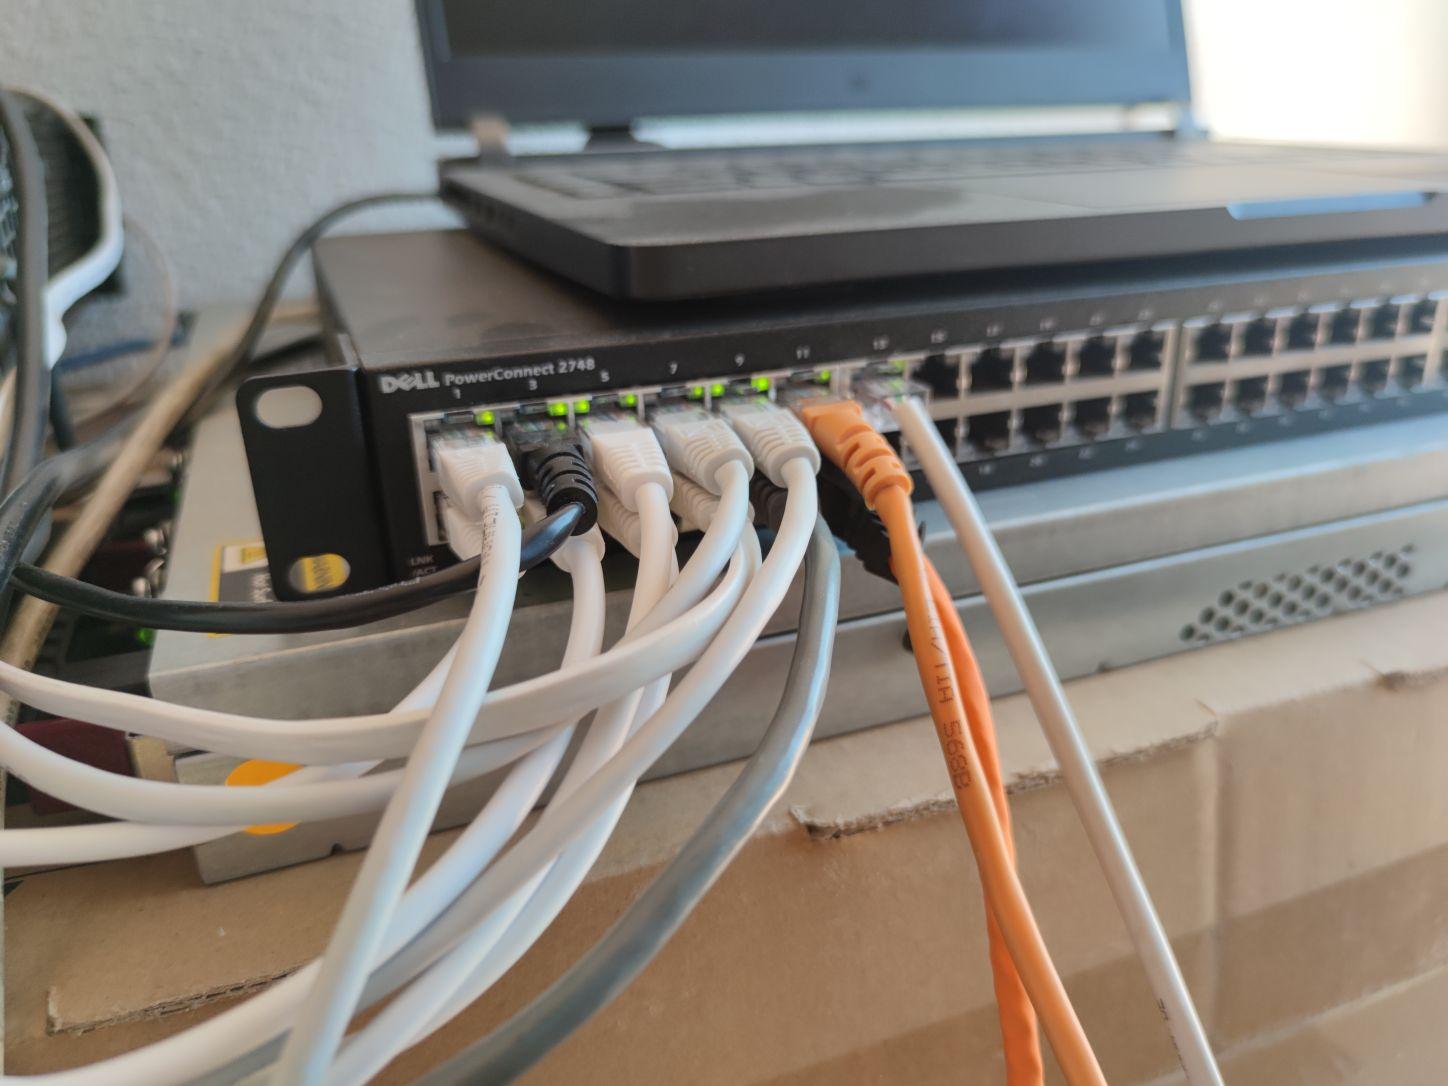 My "main" switch connecting my home to the internet.